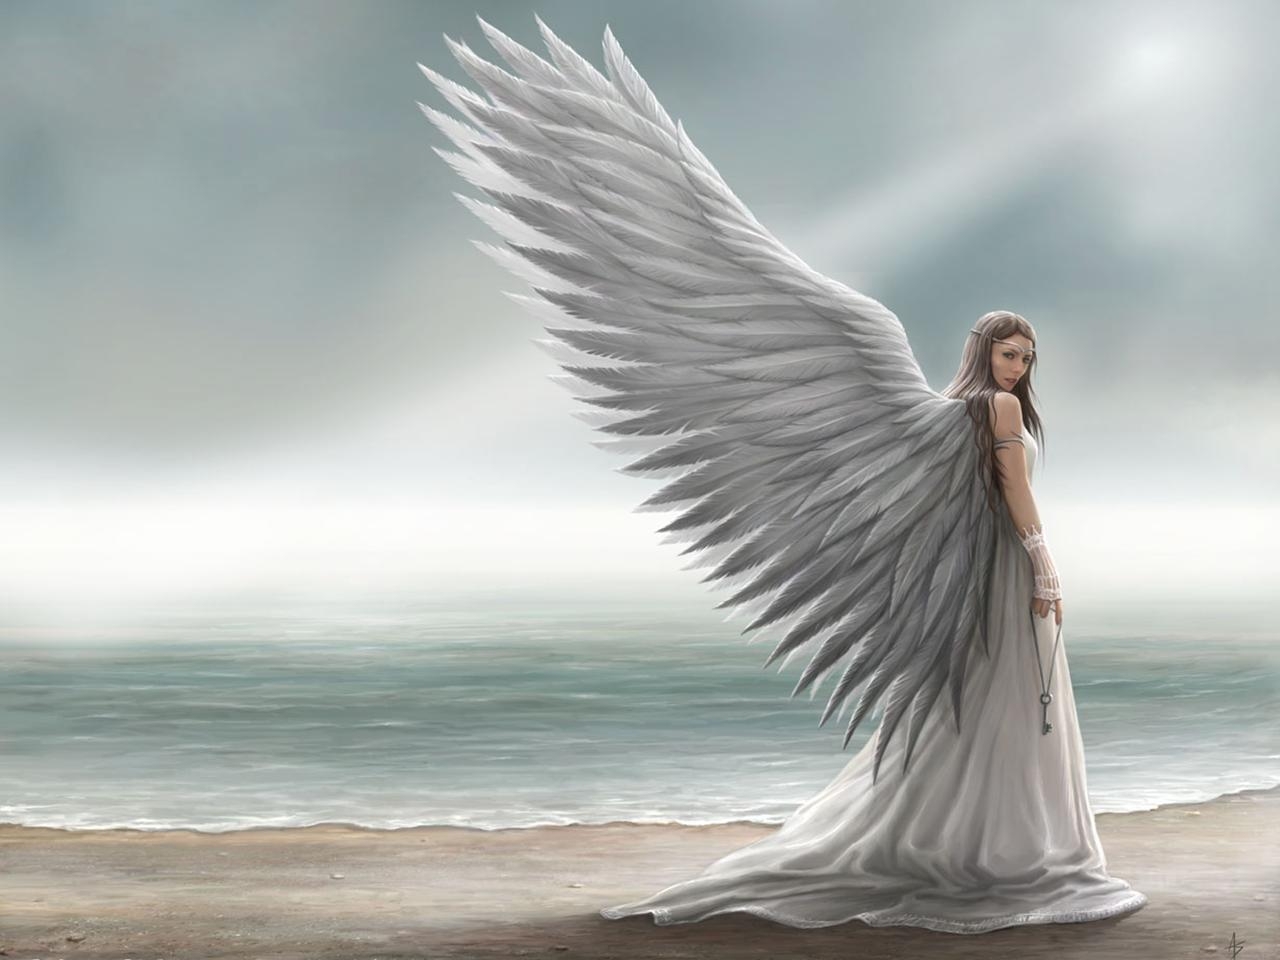 Download Angels wallpaper for mobile phone, free Angels HD picture